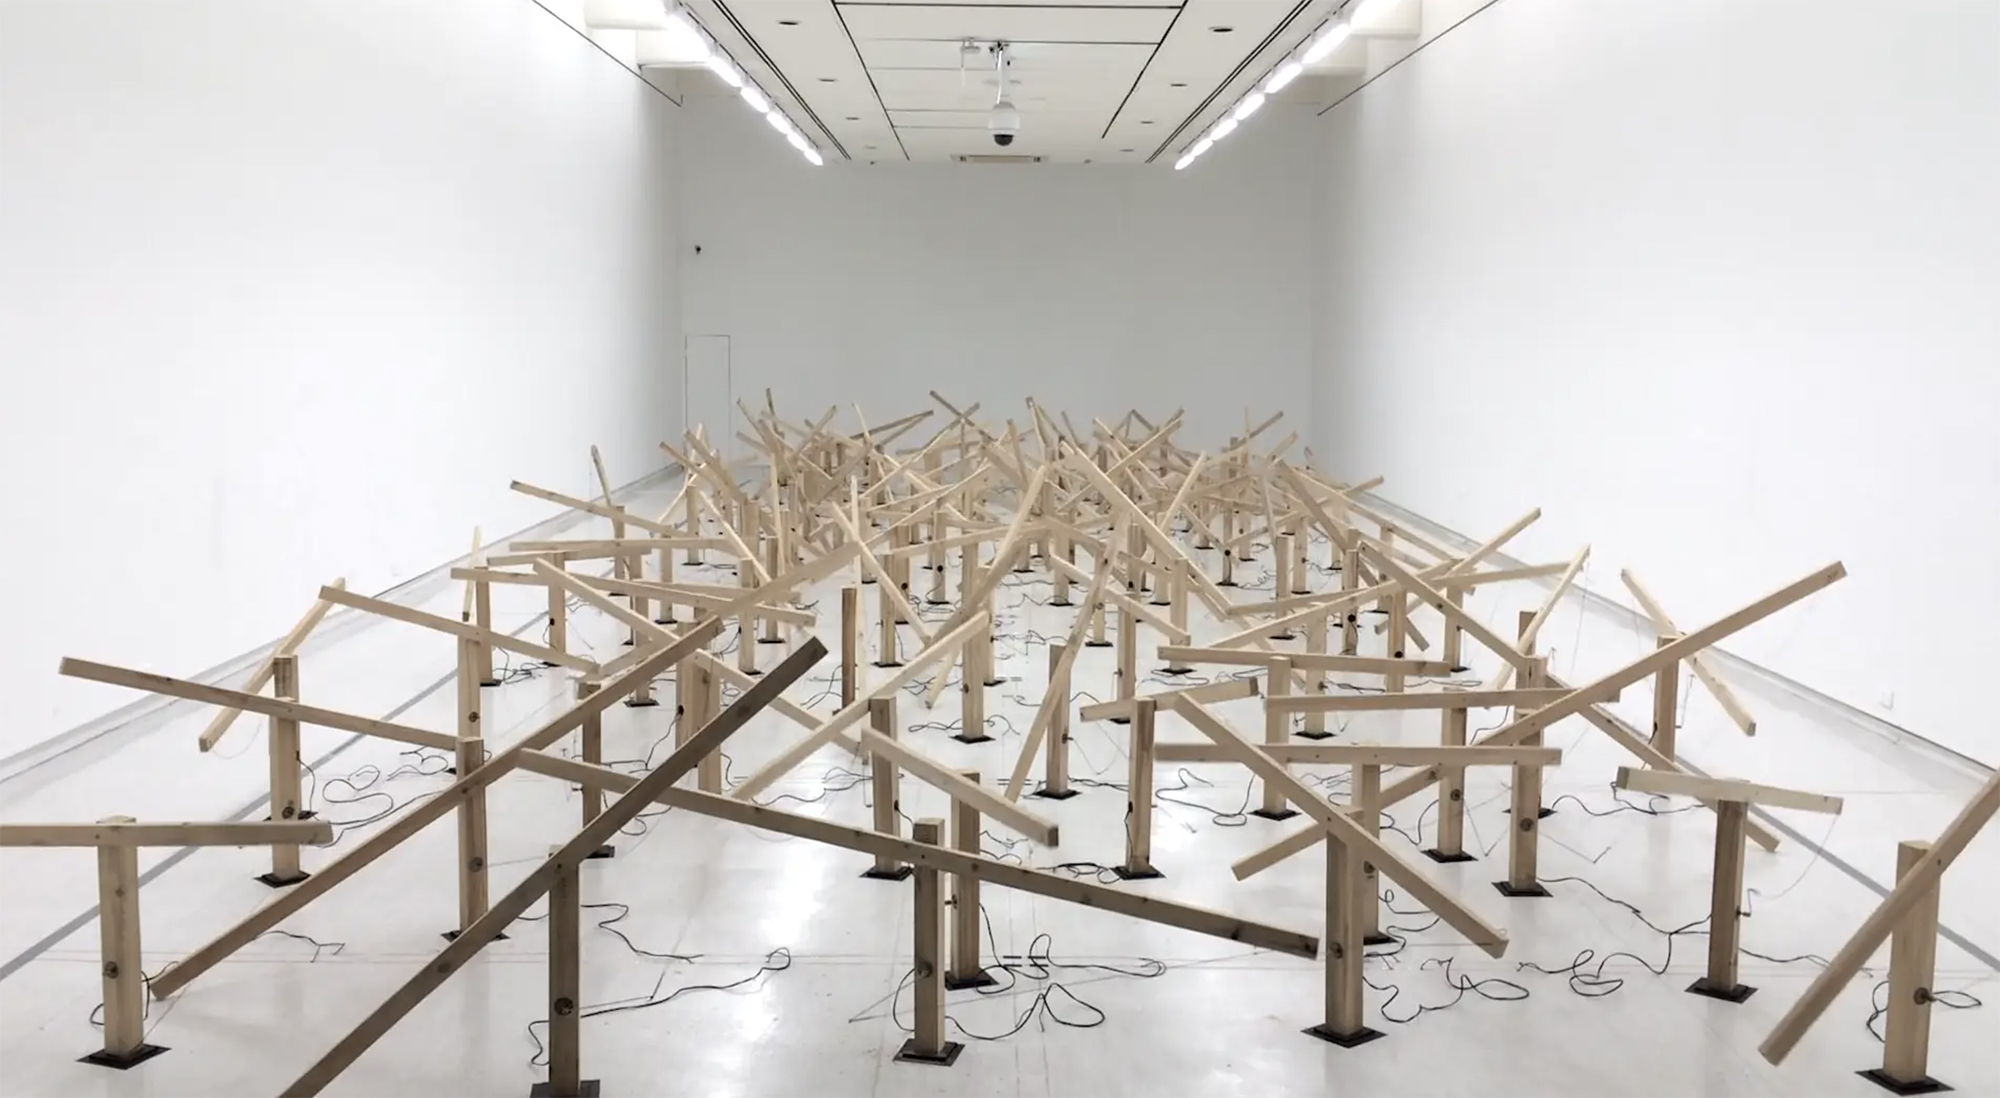 Sound Artist Zimoun Channels Frenetic Movement in Expansive Kinetic Sculptures and Installations | 国外美陈 美陈网站 美陈前沿 